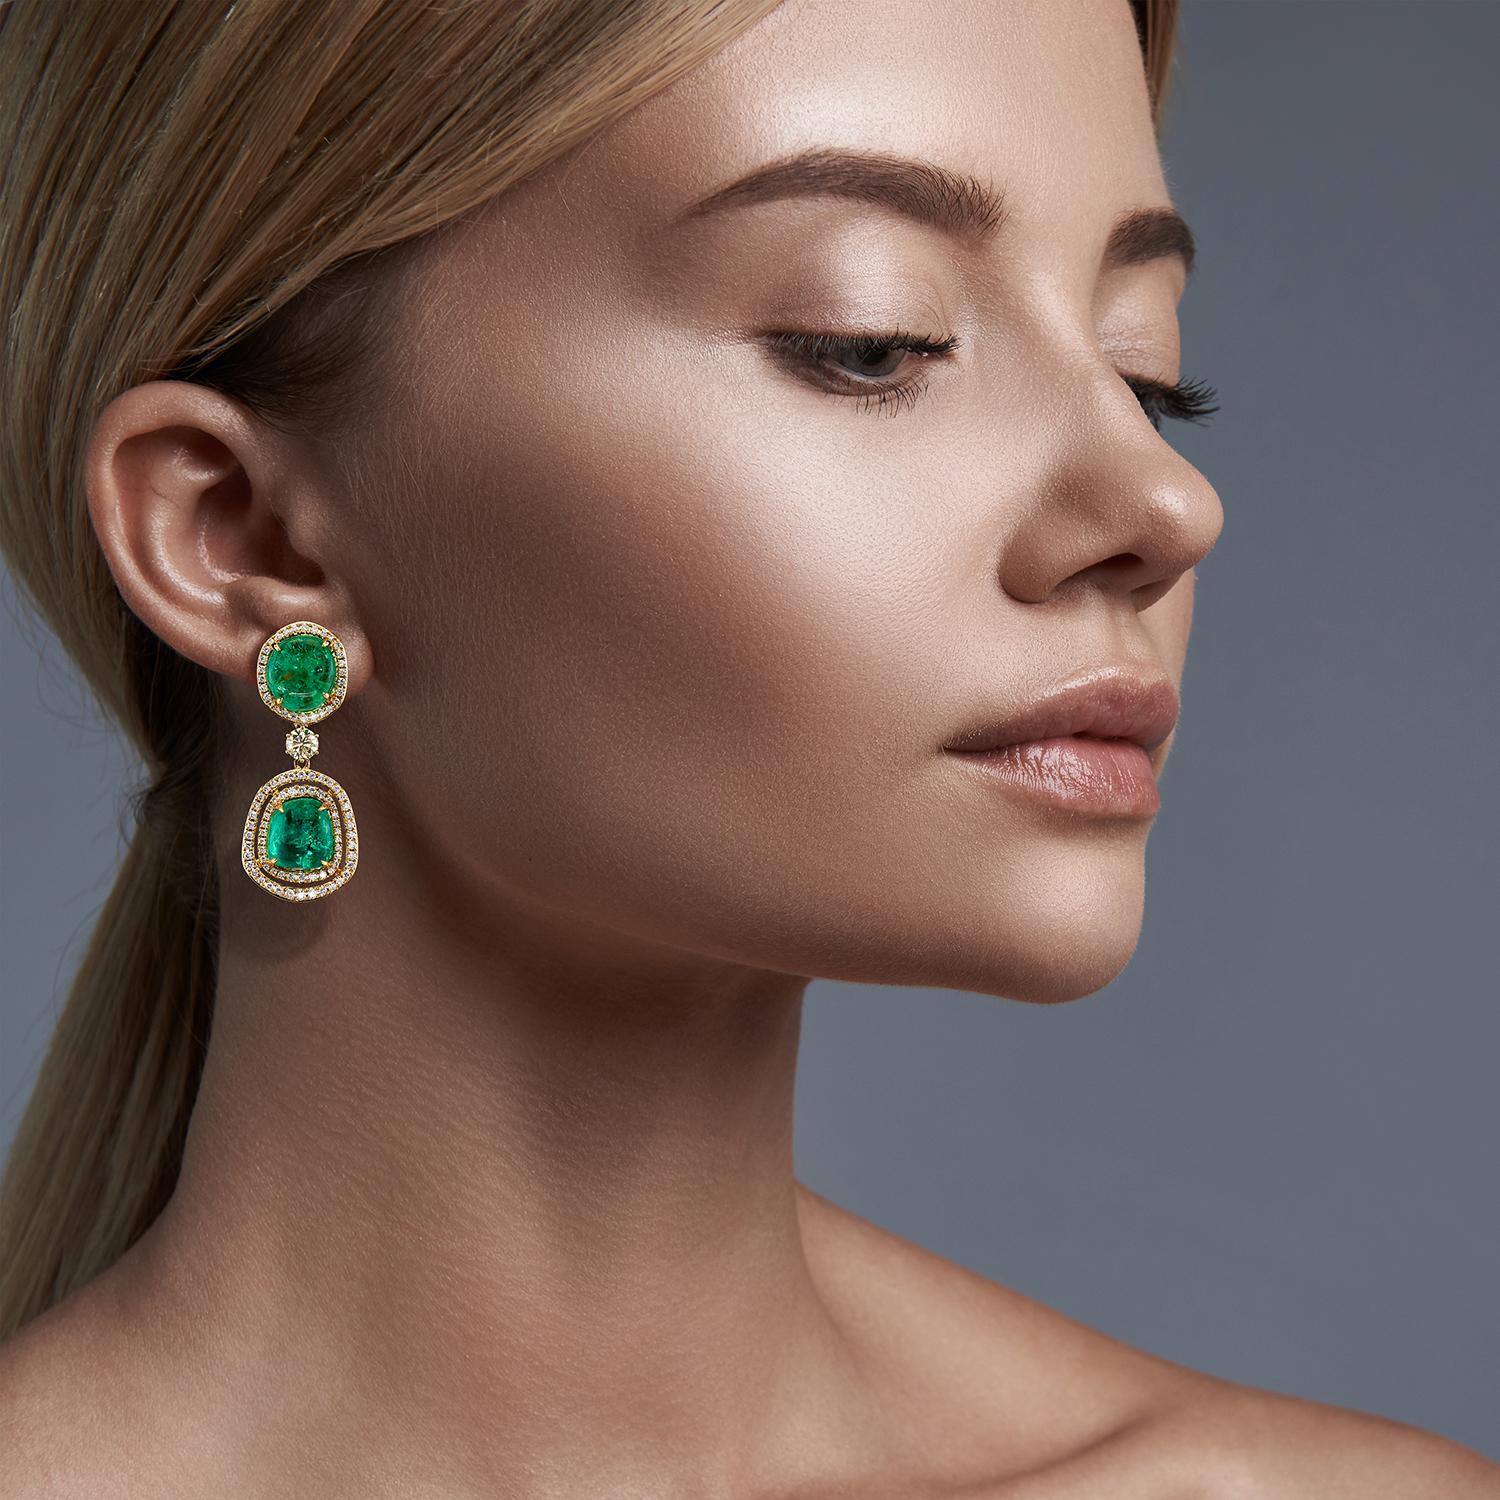 Muzo Emerald Colombia Heritage Verity Earrings set with 45.81 carats Emerald

Verity is a tribute to the trade between the Spaniards and Indian Maharajahs, two unique cultures that share a passion for gilded treasures and precious emerald gemstones.